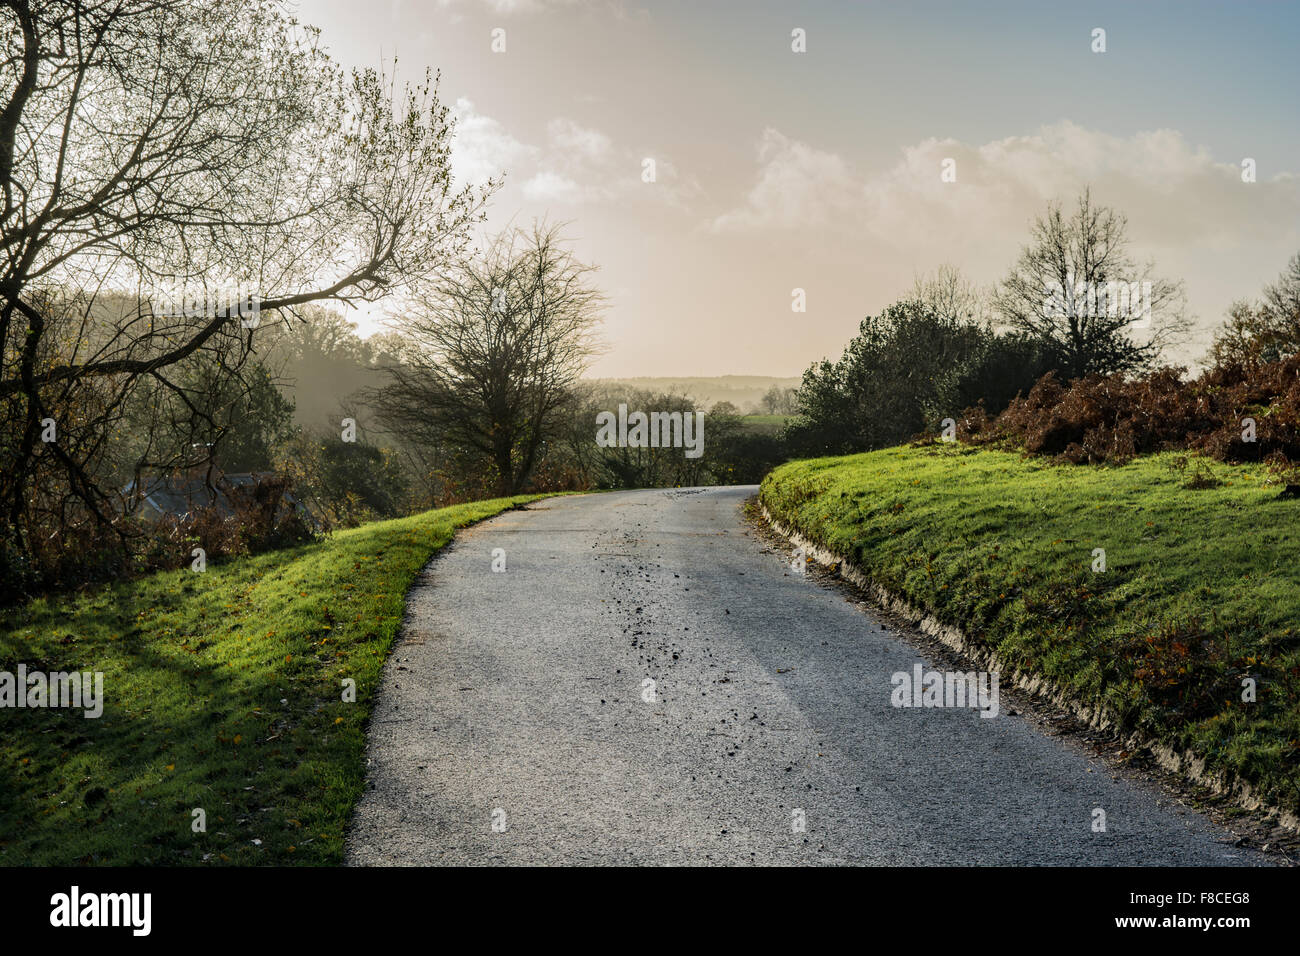 Narrow winding country road in the New Forest, Hampshire, bathed in winter sunshine. Stock Photo